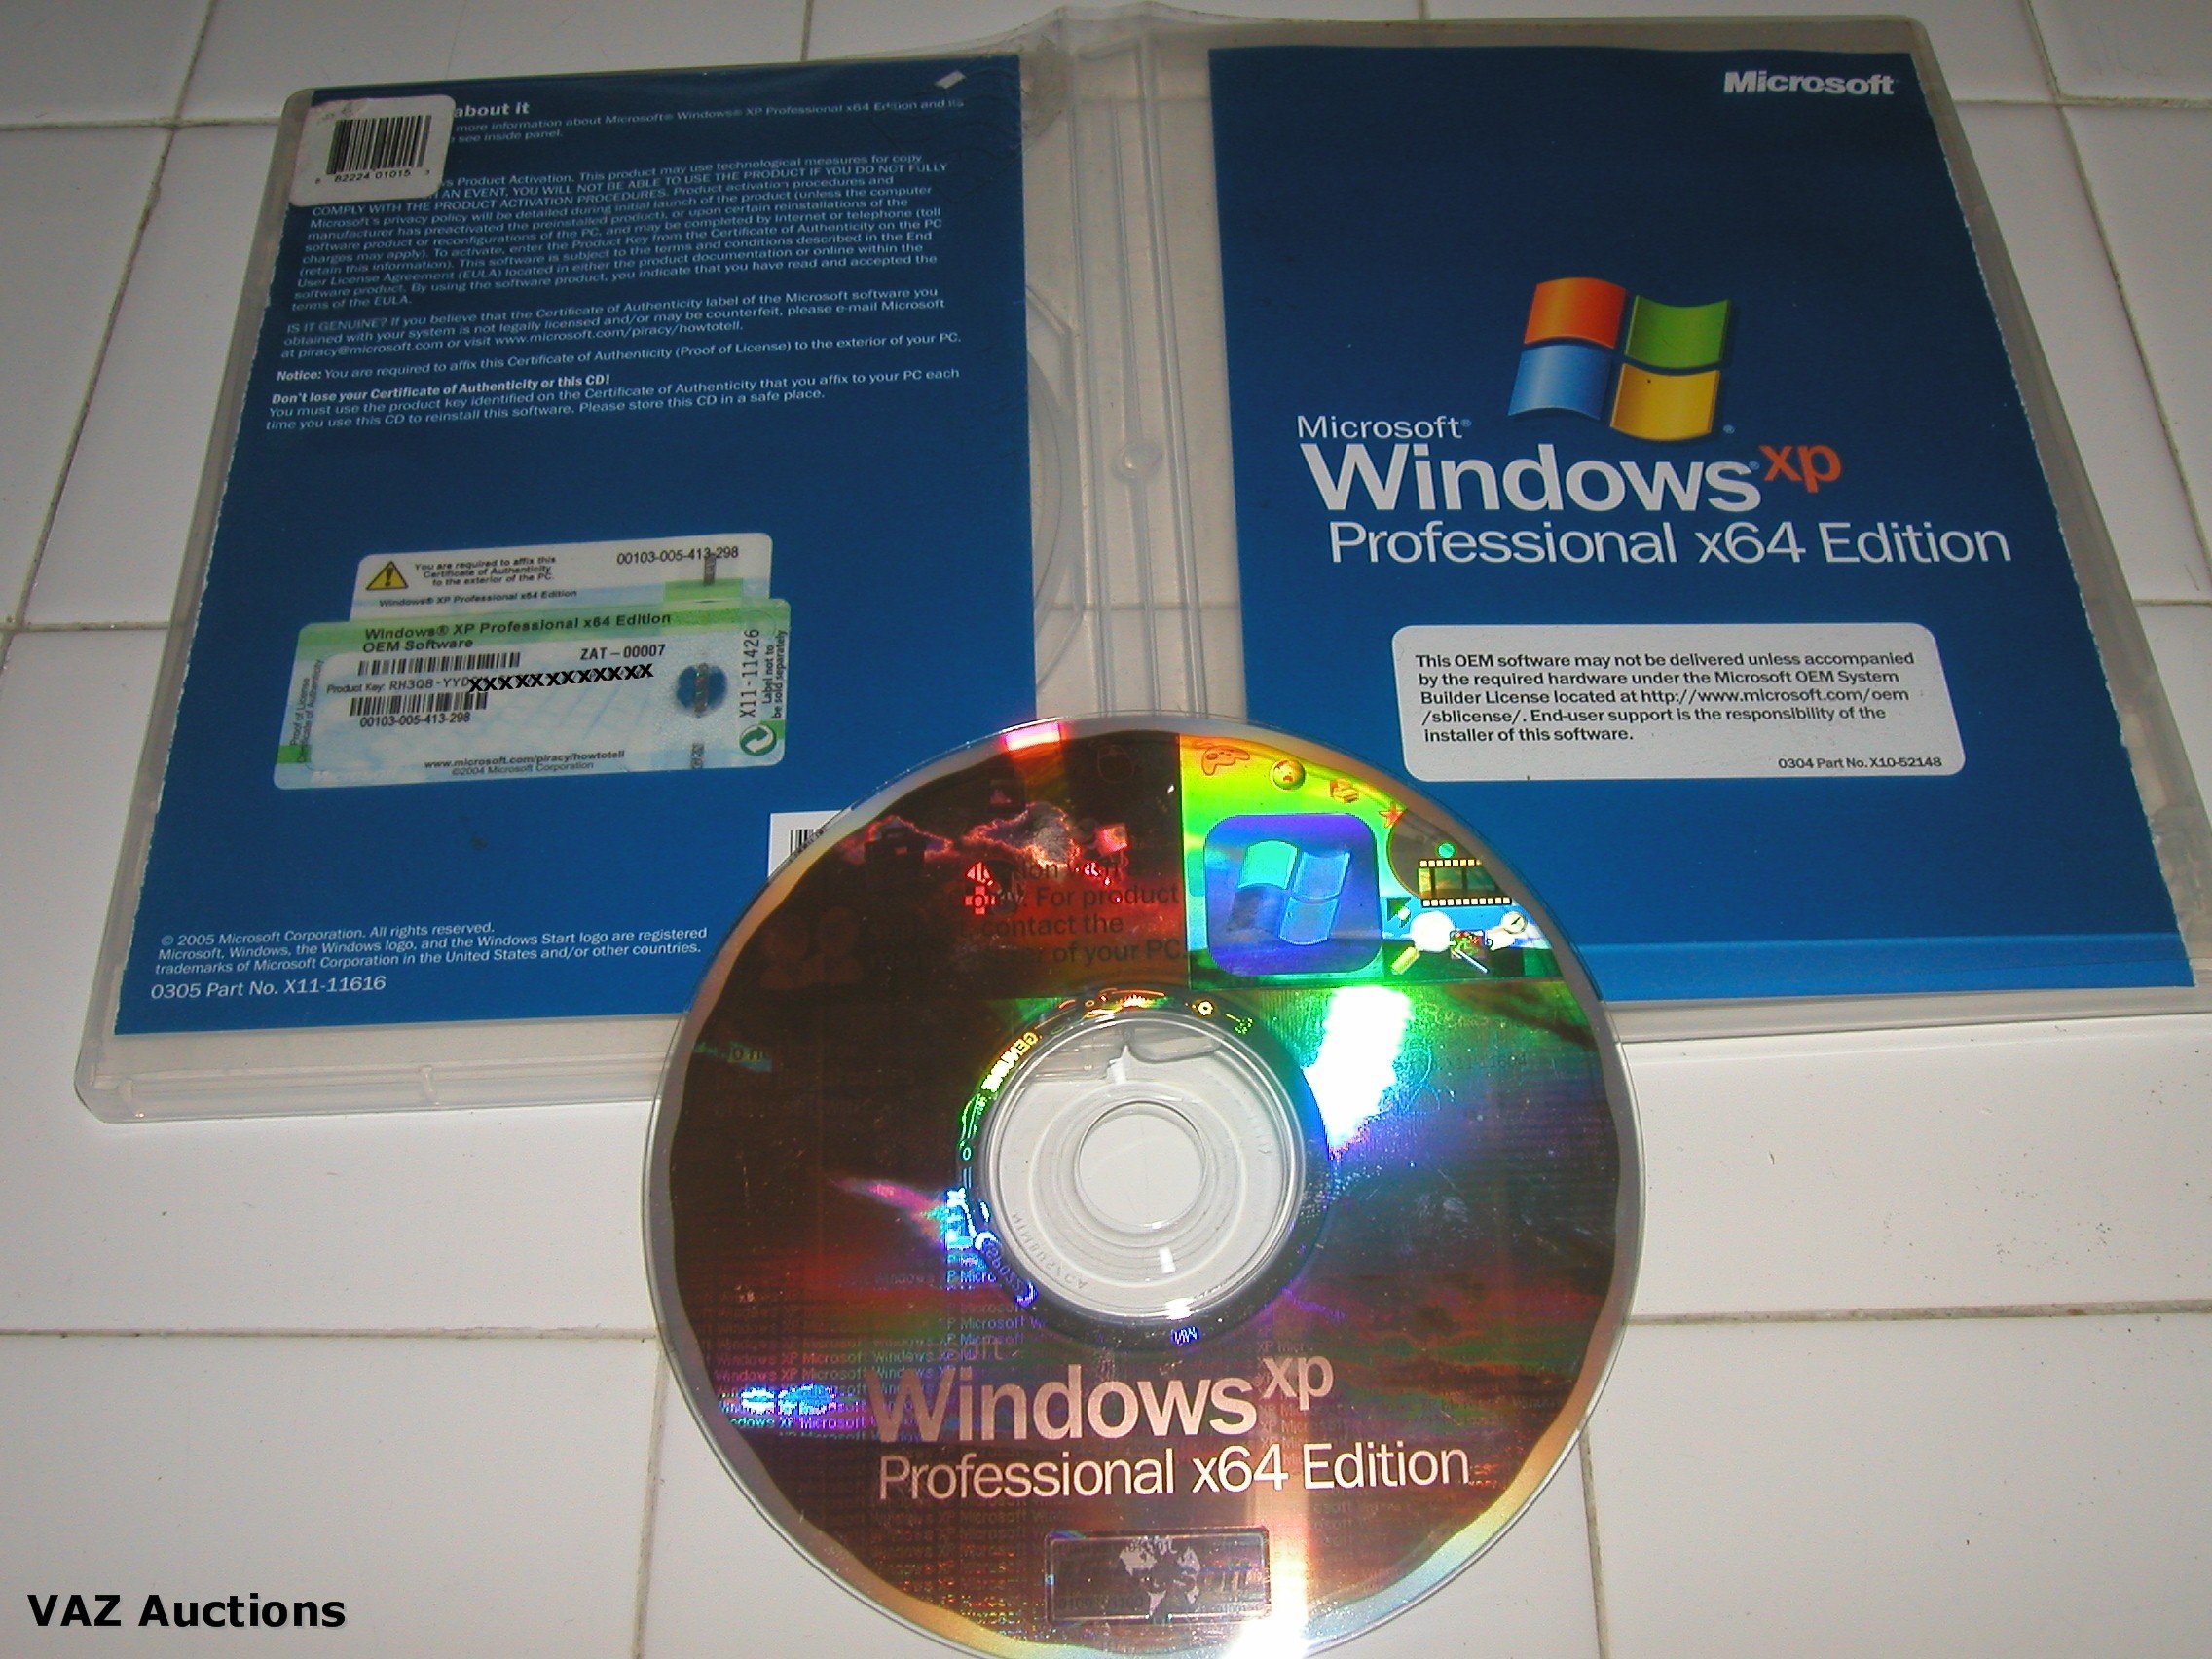 Microsoft Windows XP Pro X64 Edition SP2B for System Builders [Old Version]